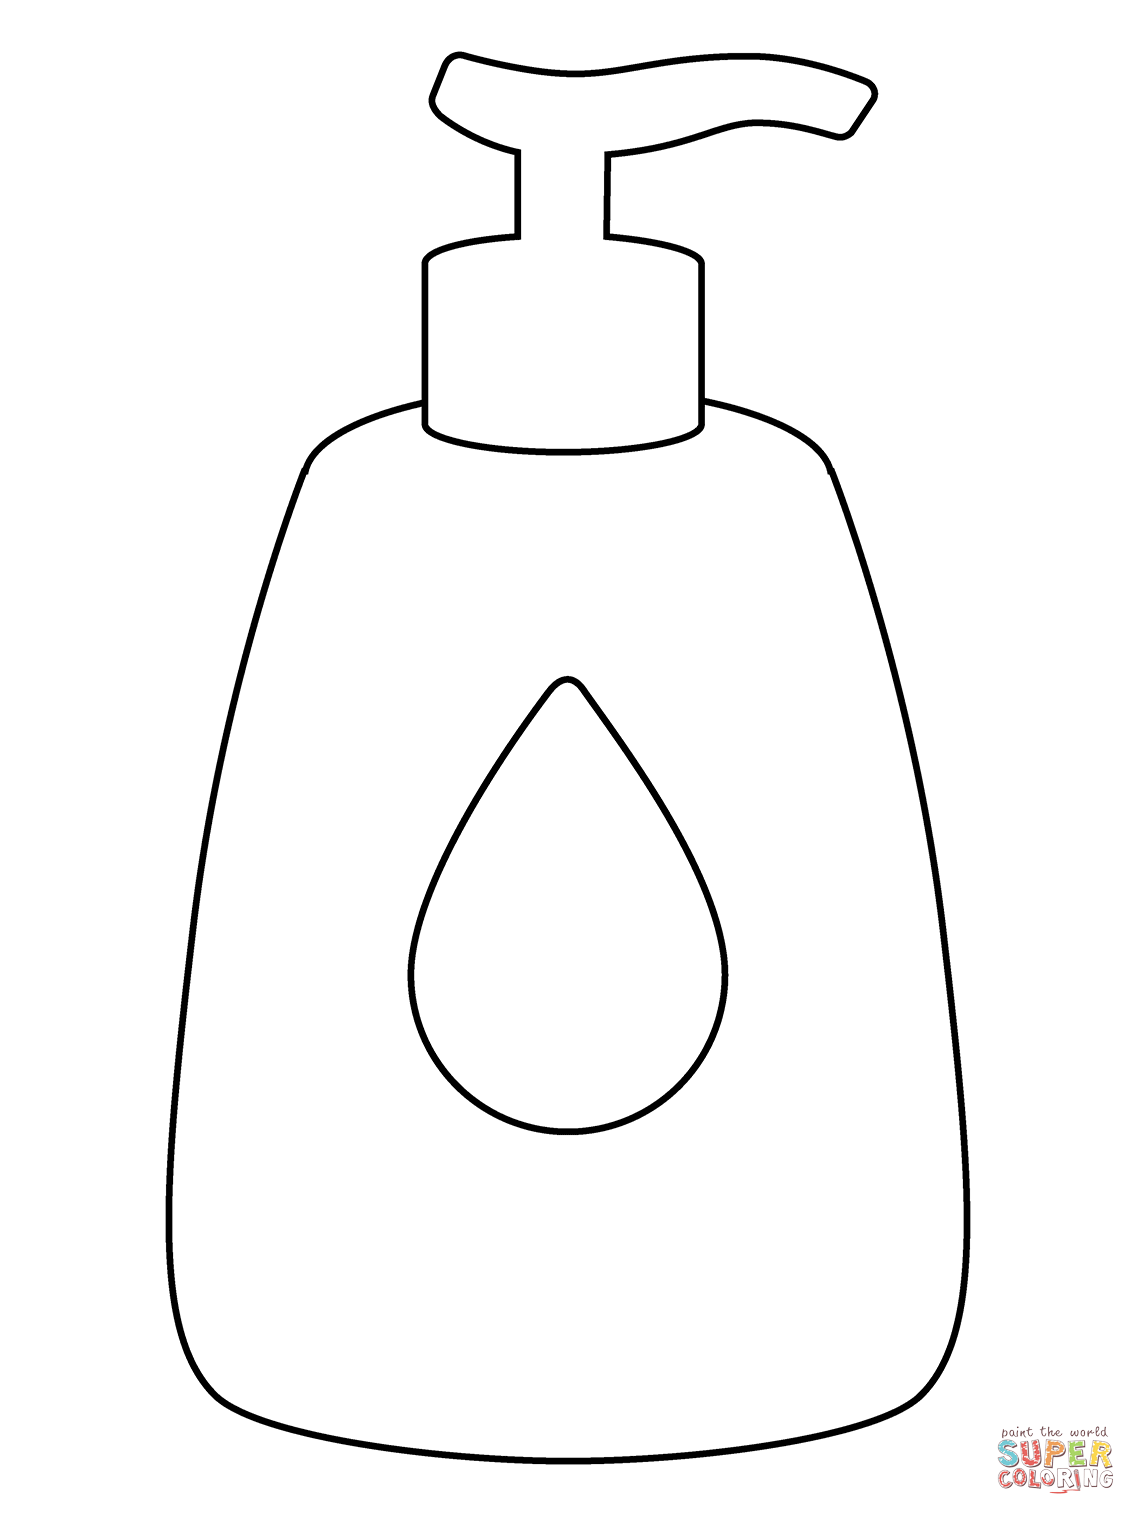 Lotion bottle emoji coloring page free printable coloring pages